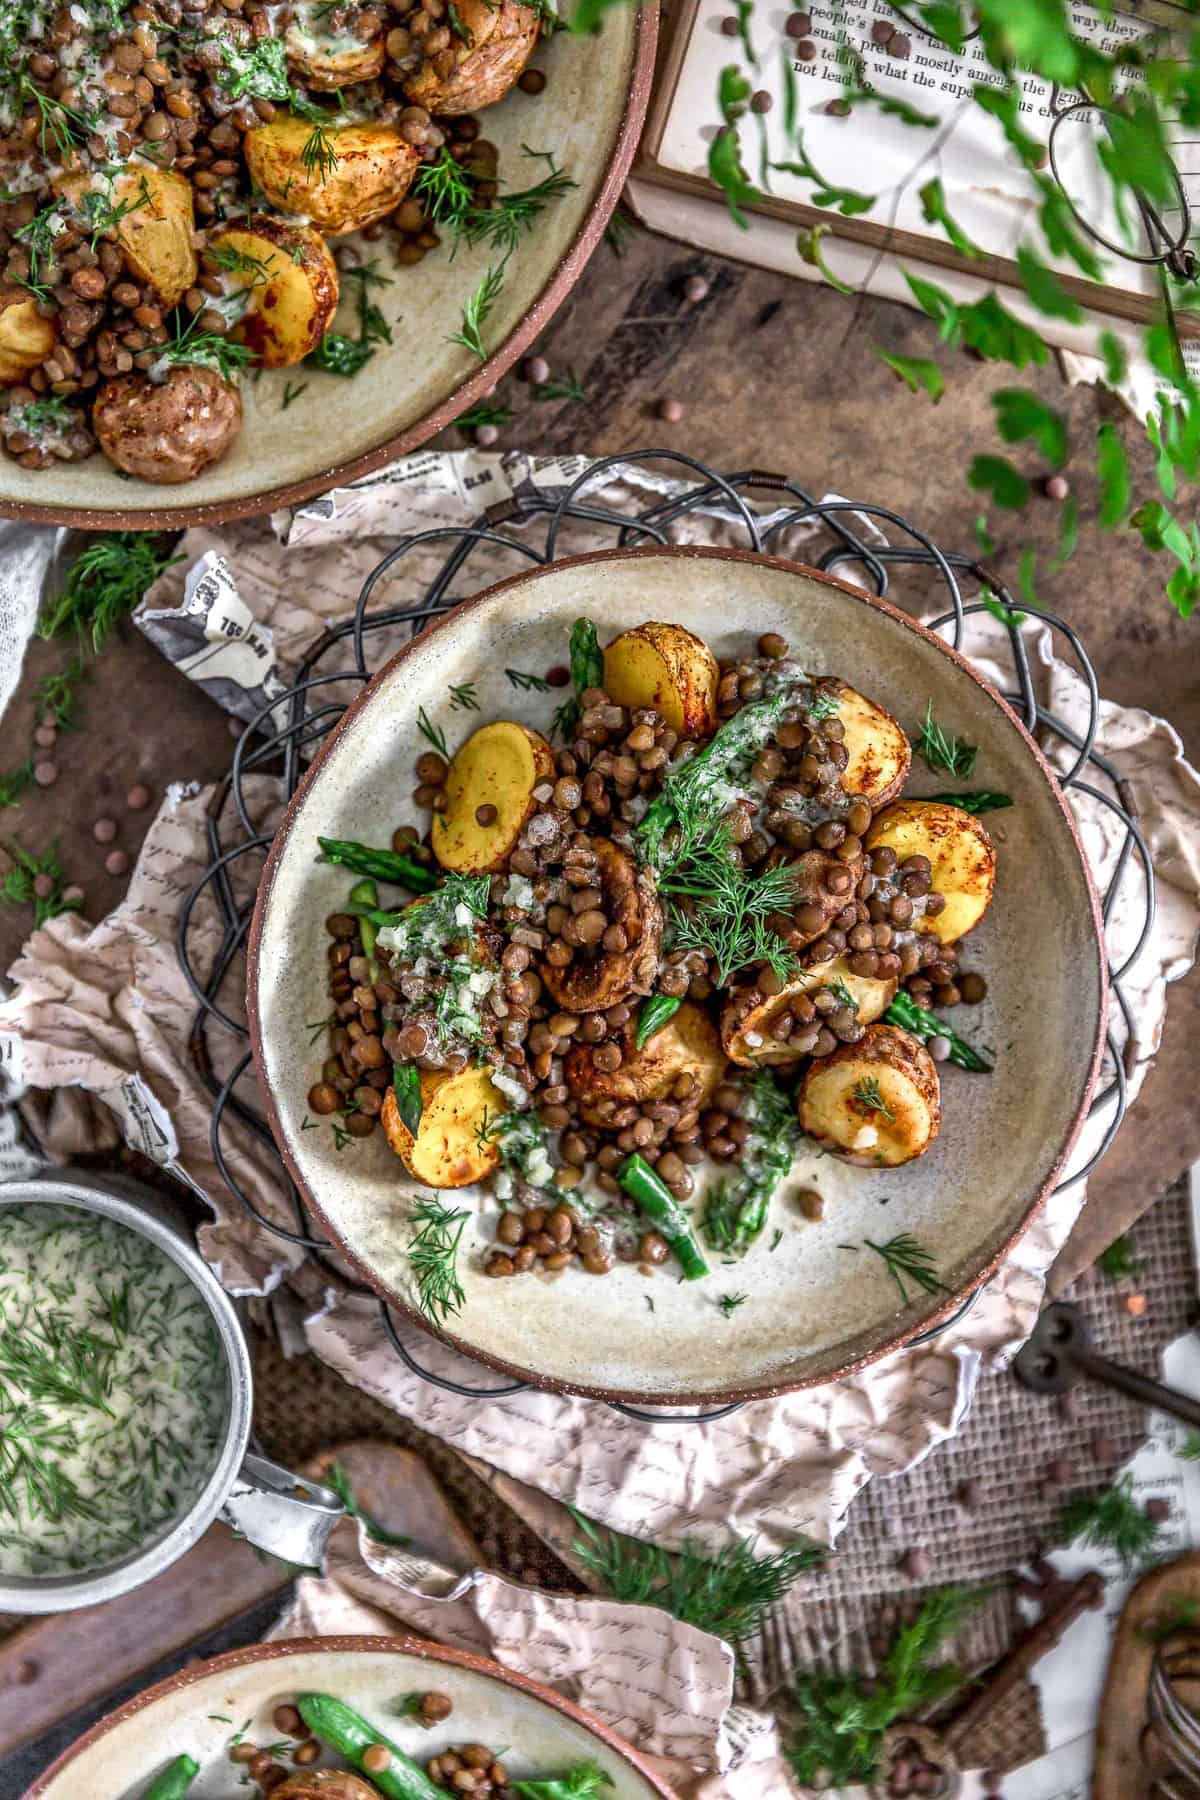 Plated Roasted Potatoes with Seasoned Lentils and Dill Sauce